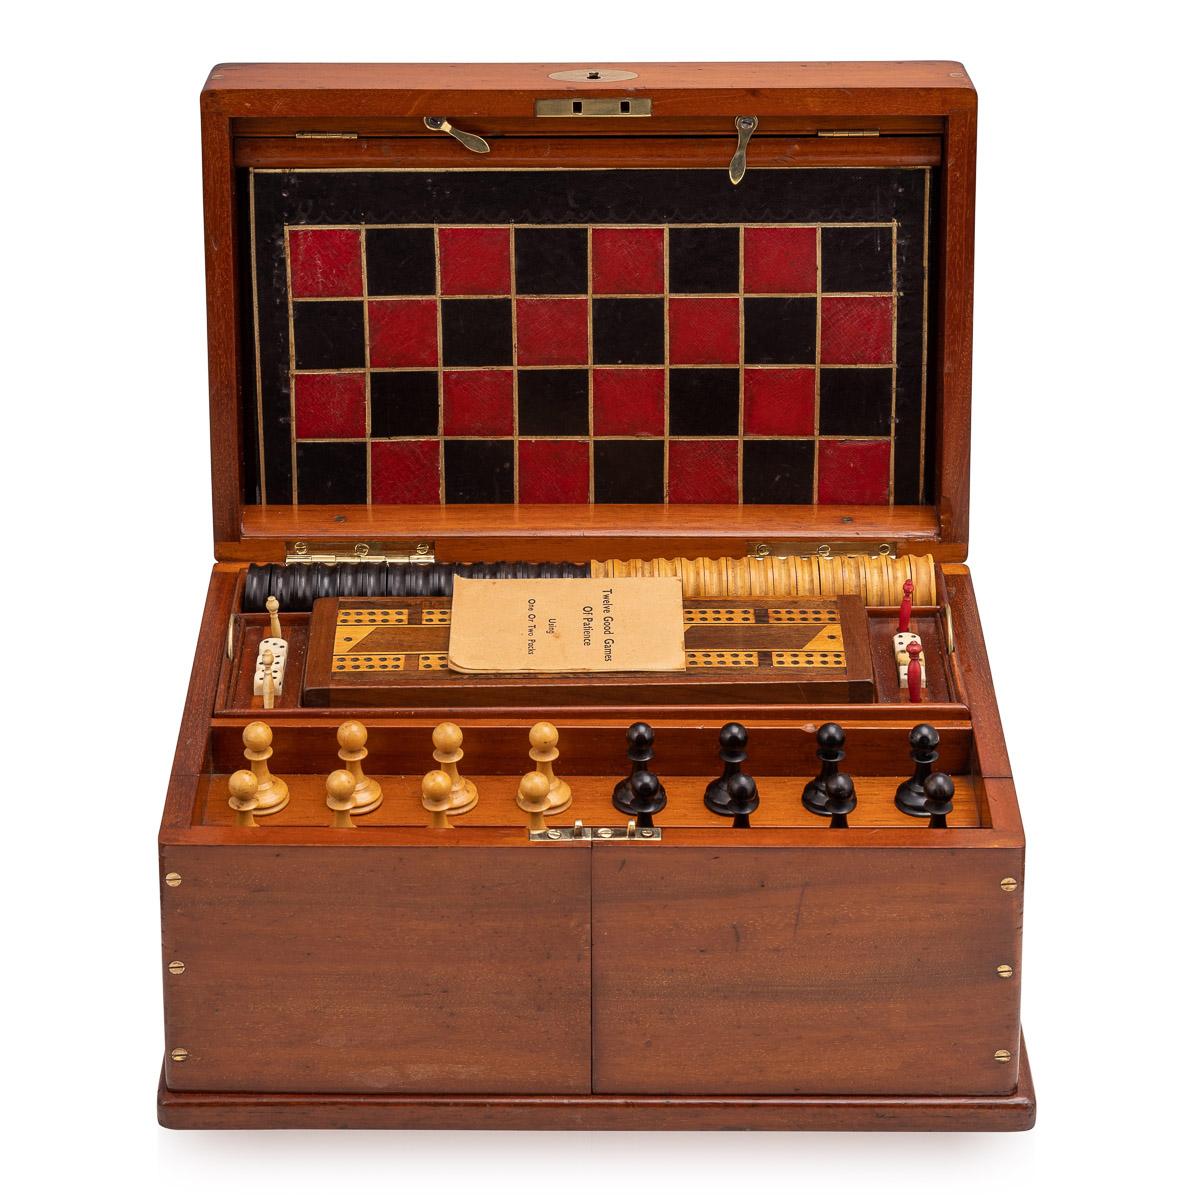 Antique late 19th century Victorian mahogany cased games compendium, the interior comprising a boxwood and ebony chess set, Draughts, dominoes, dice, cribbage board with markers, leather bound boards for games, playing cards, gavel, droughts